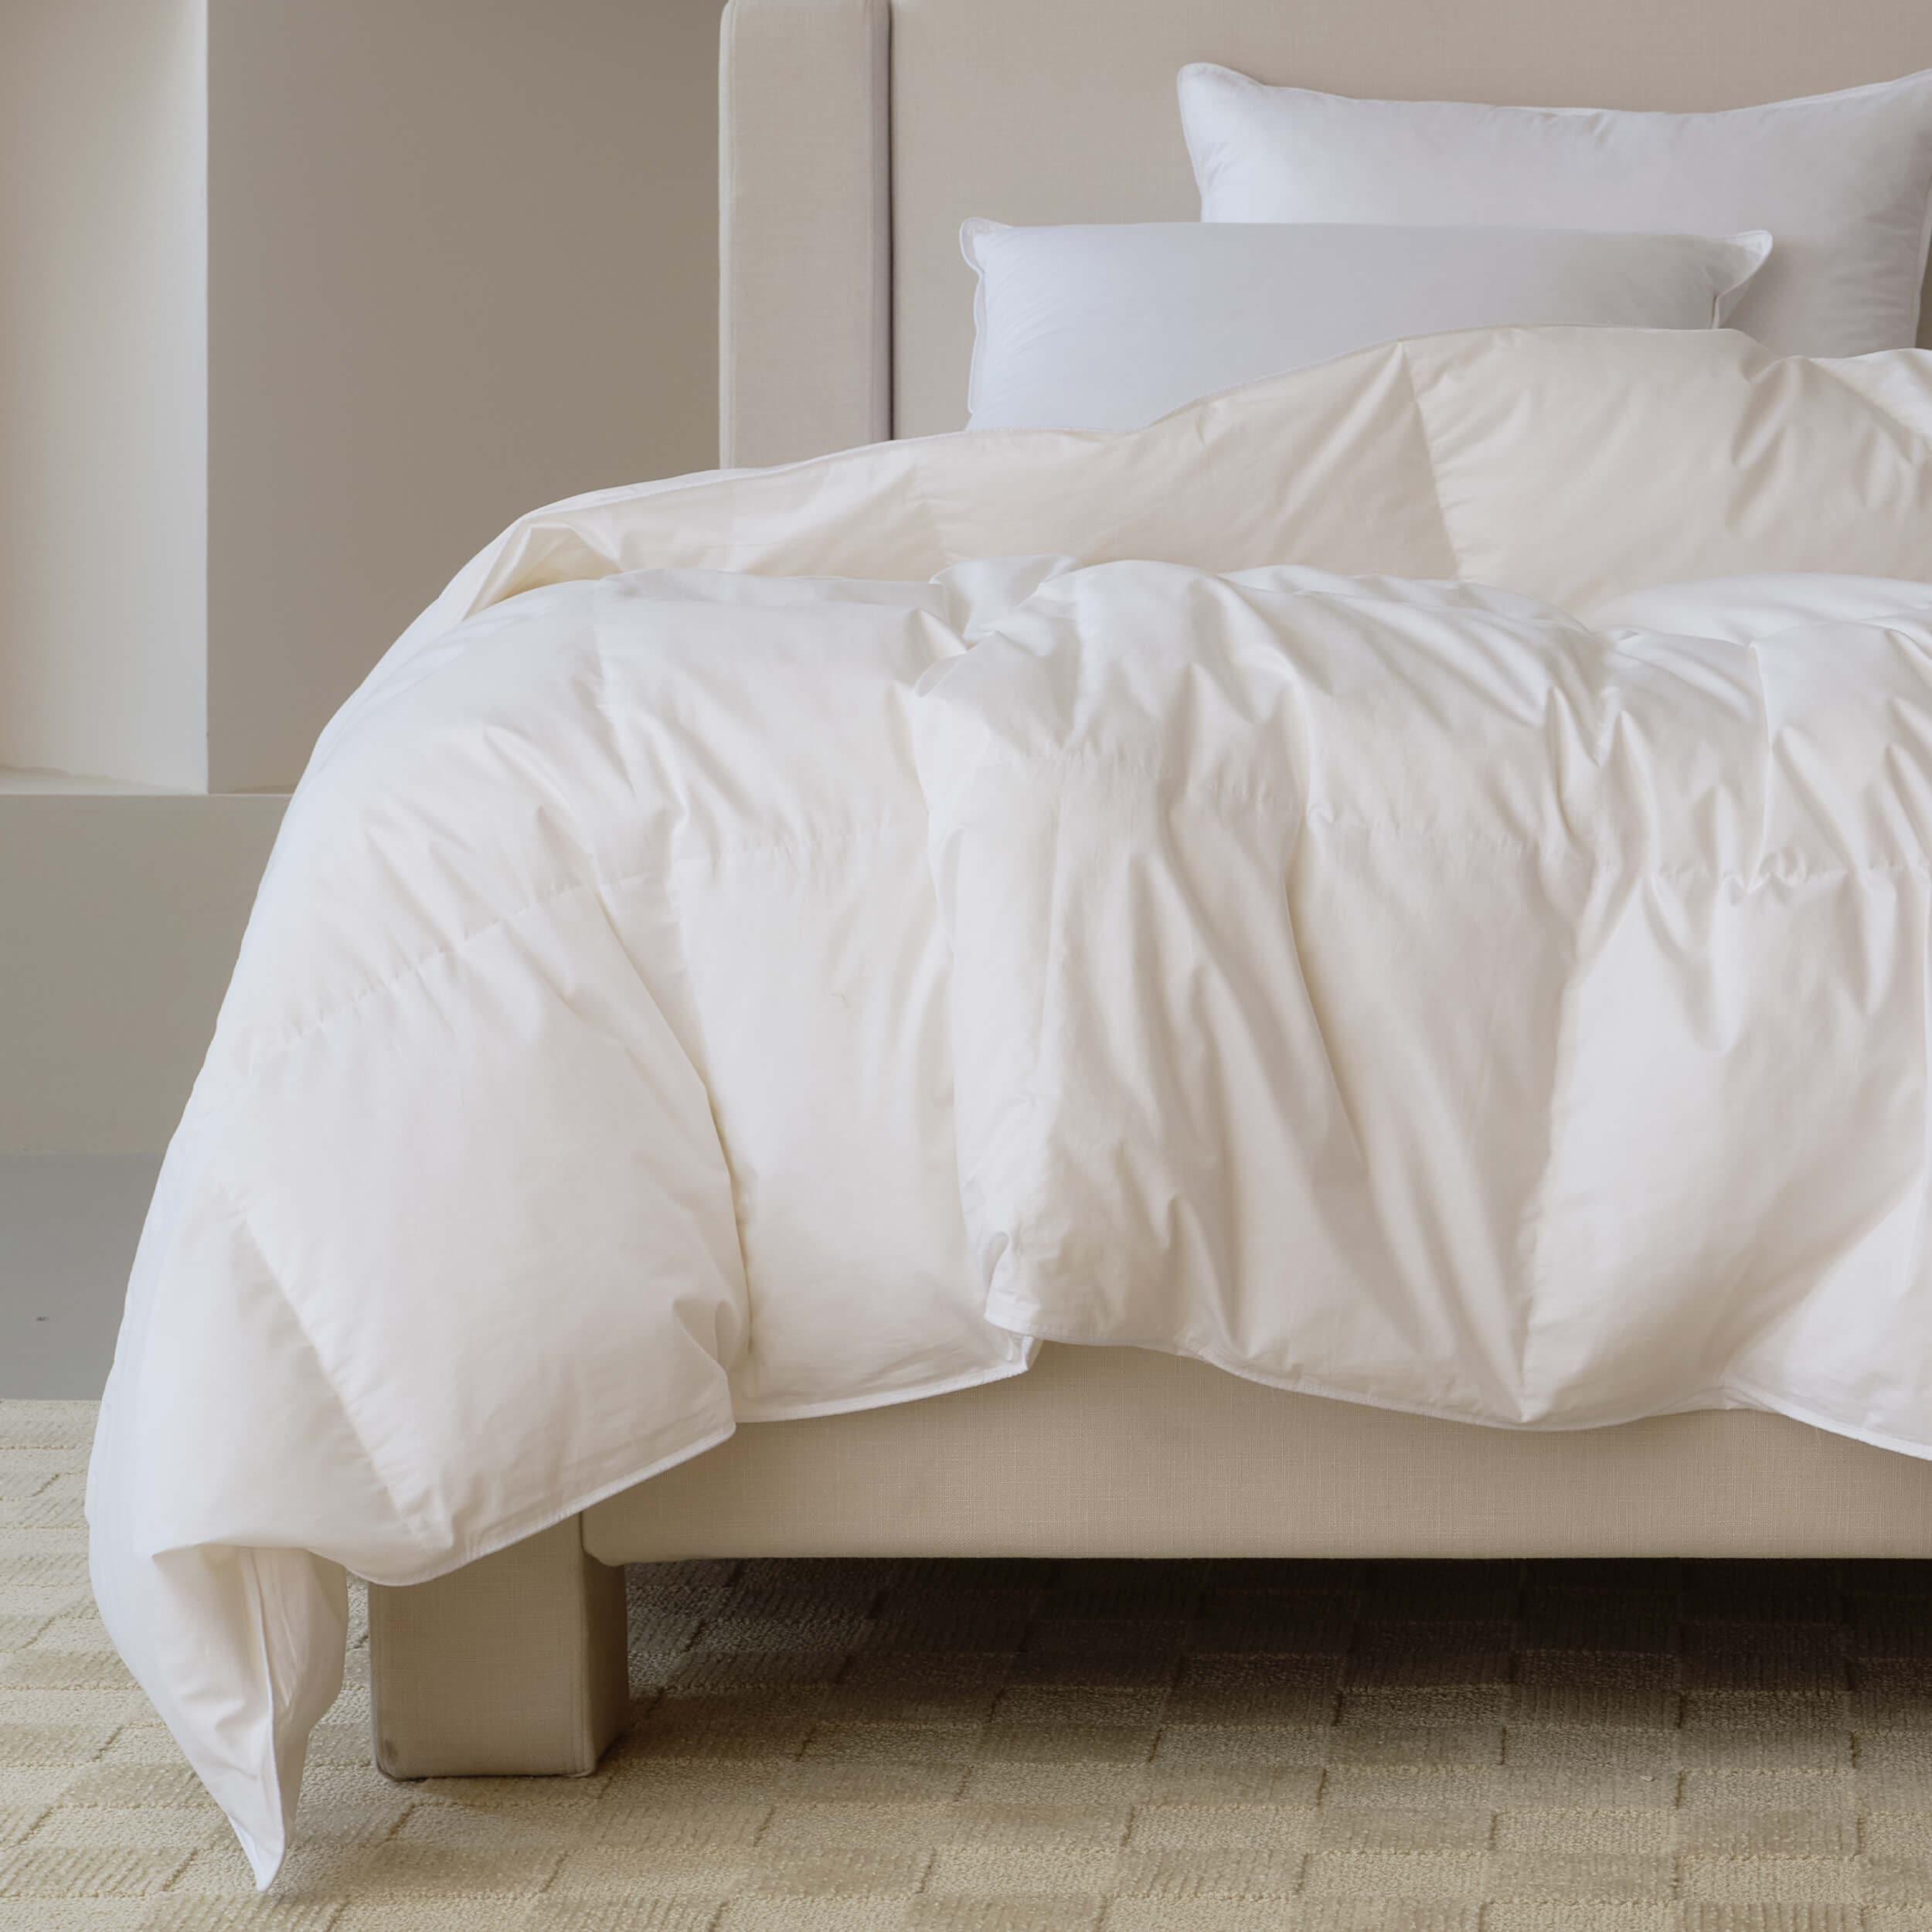 Enjoy the perfect balance of softness and support with our king duvet insert.